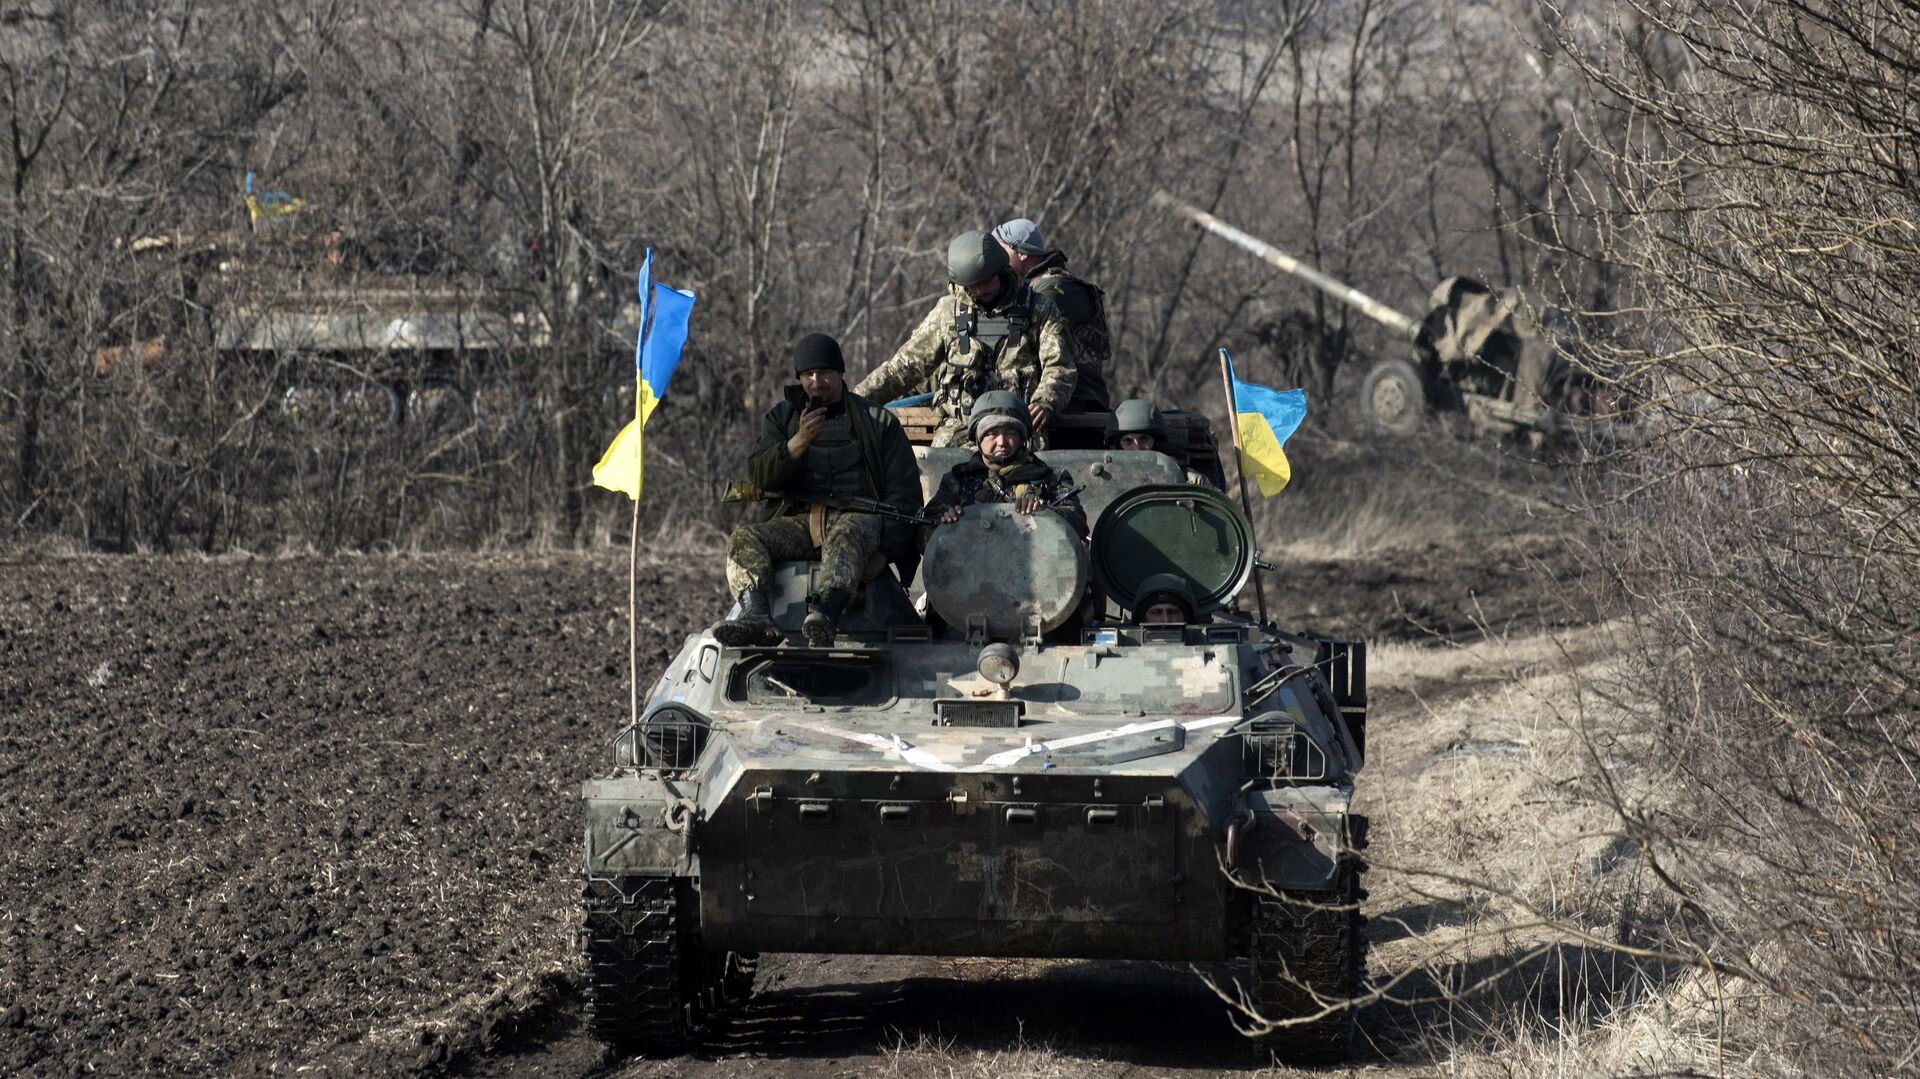 Ukrainian servicemen ride atop armored vehicle with a canon in tow and Ukrainian flags, near the village of Fedorivka, eastern Ukraine, Friday, Feb. 27, 2015 - Sputnik International, 1920, 06.02.2022